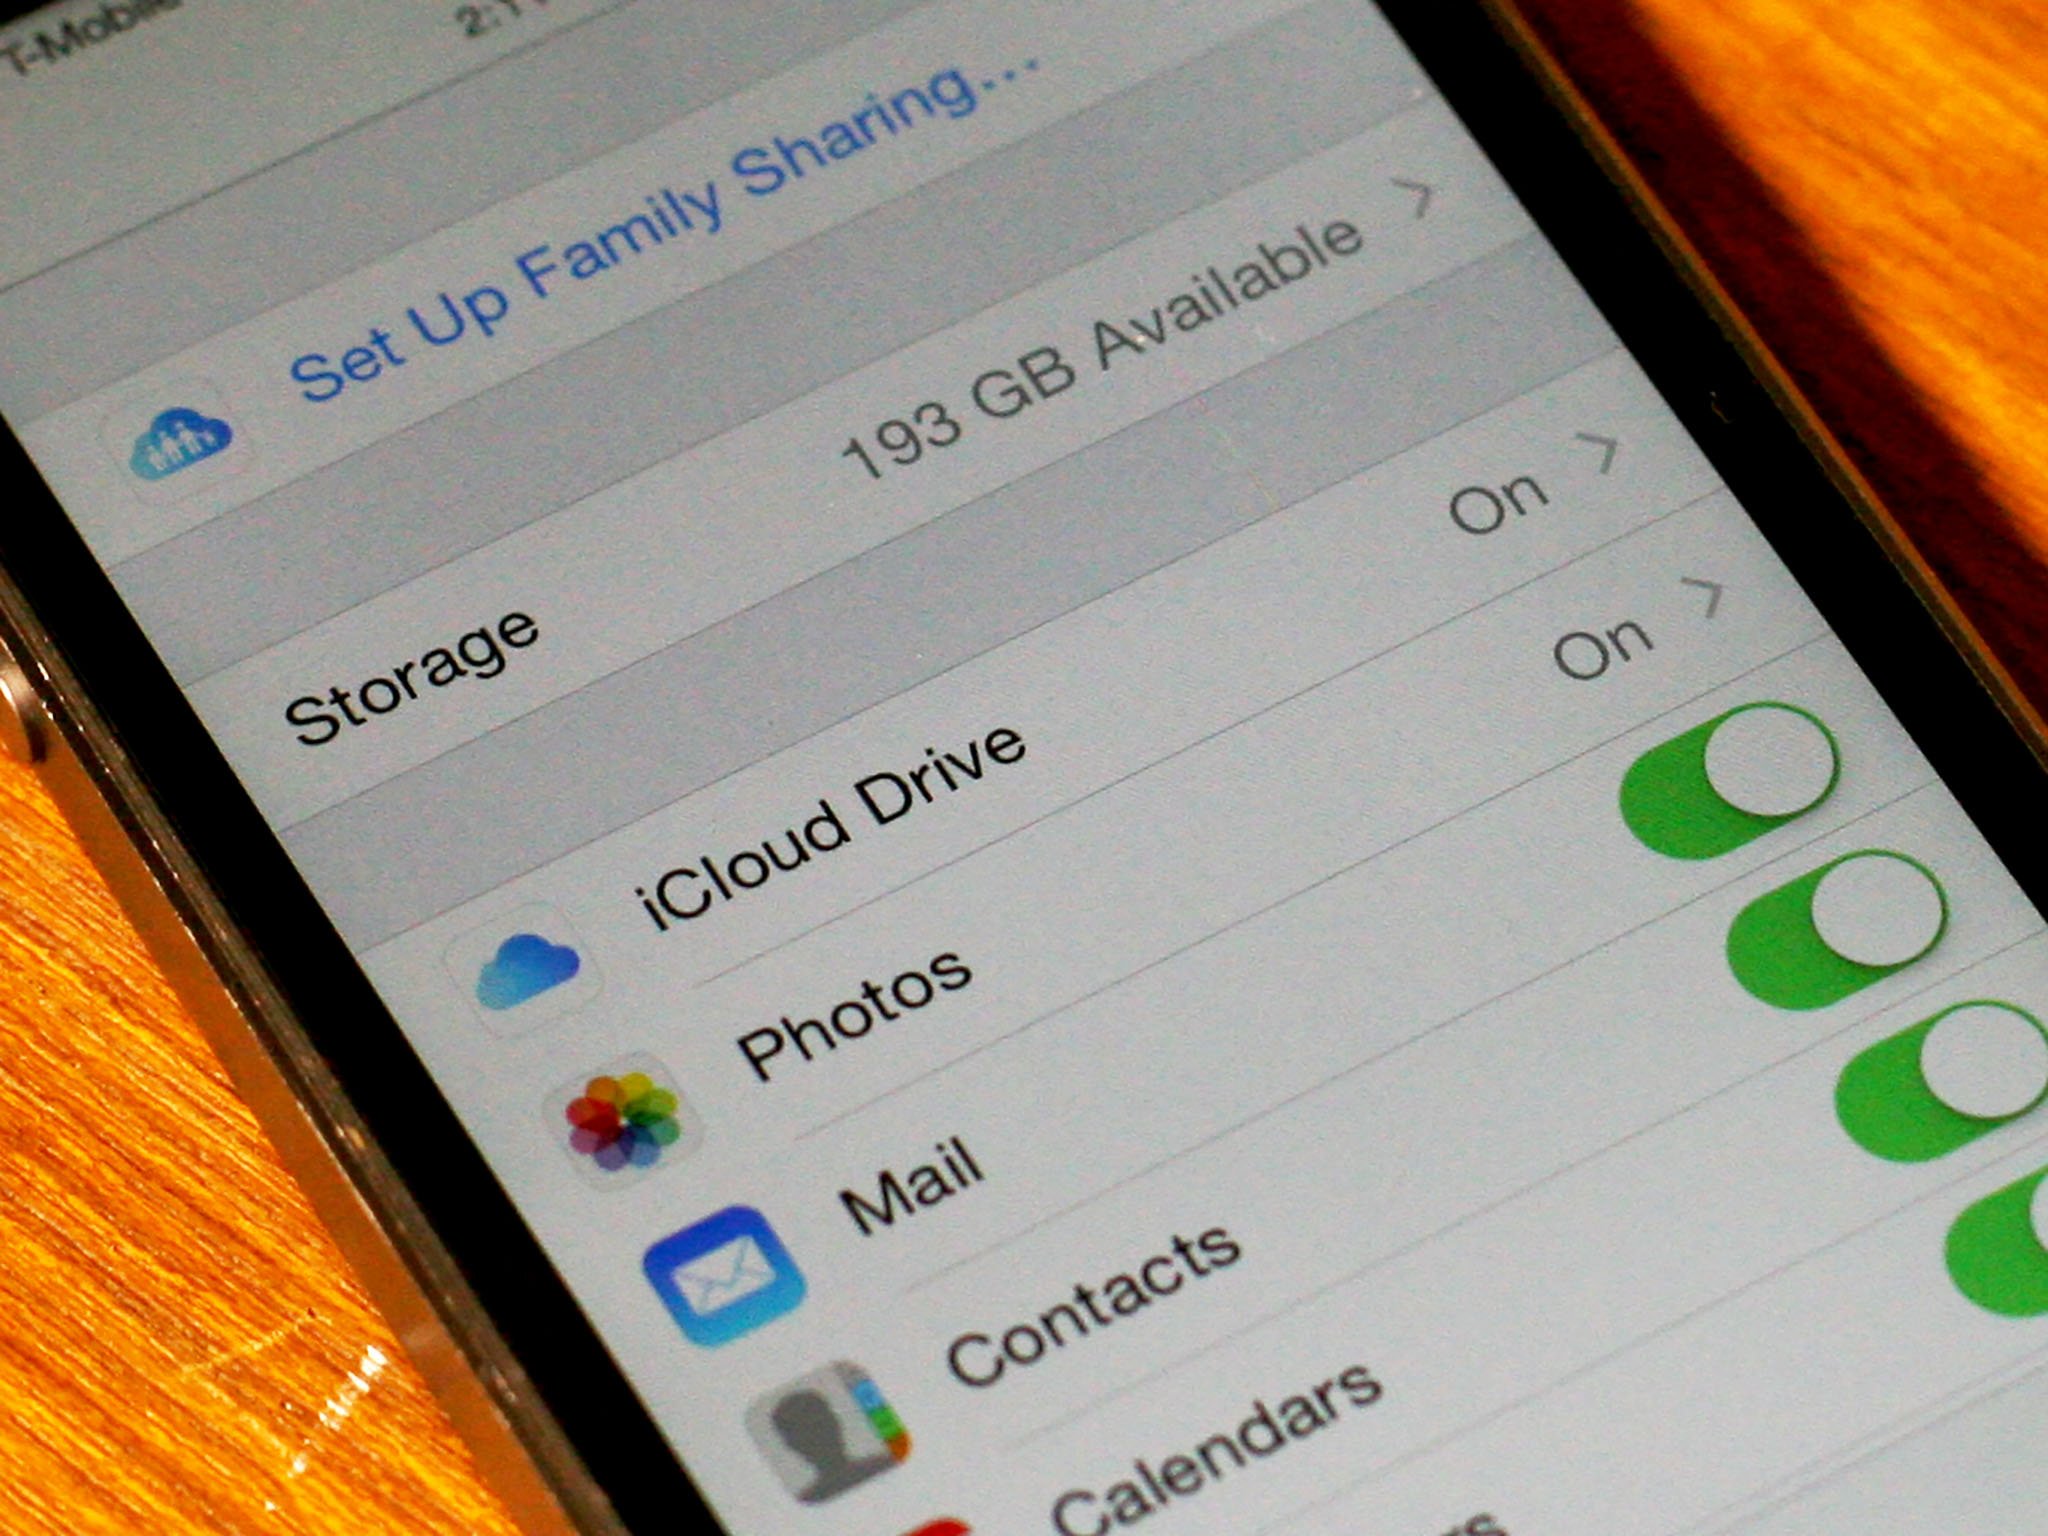 Read this before turning on iCloud Drive in iOS 8!